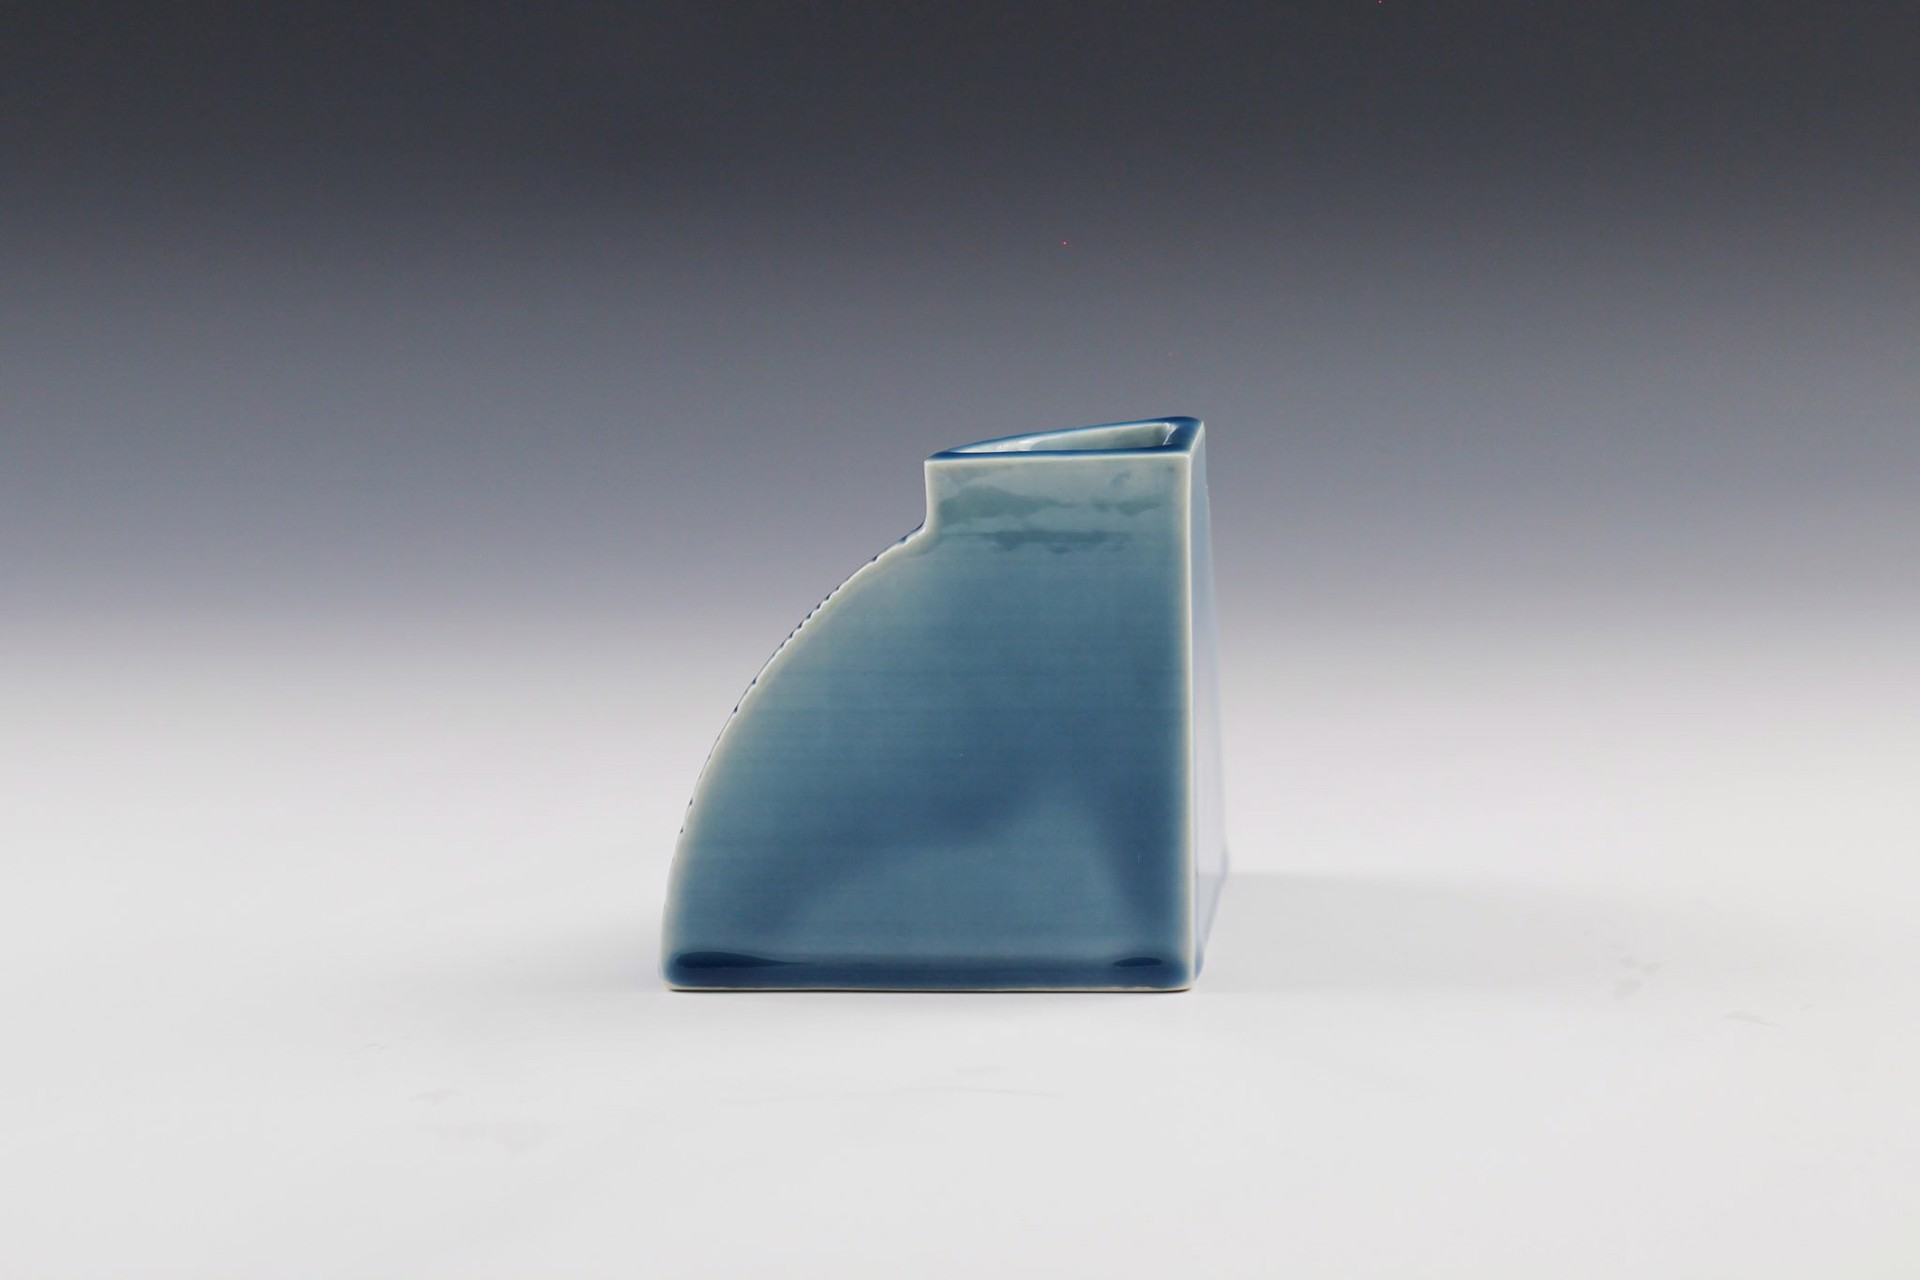 Small Bookend Vase by Jeff Campana